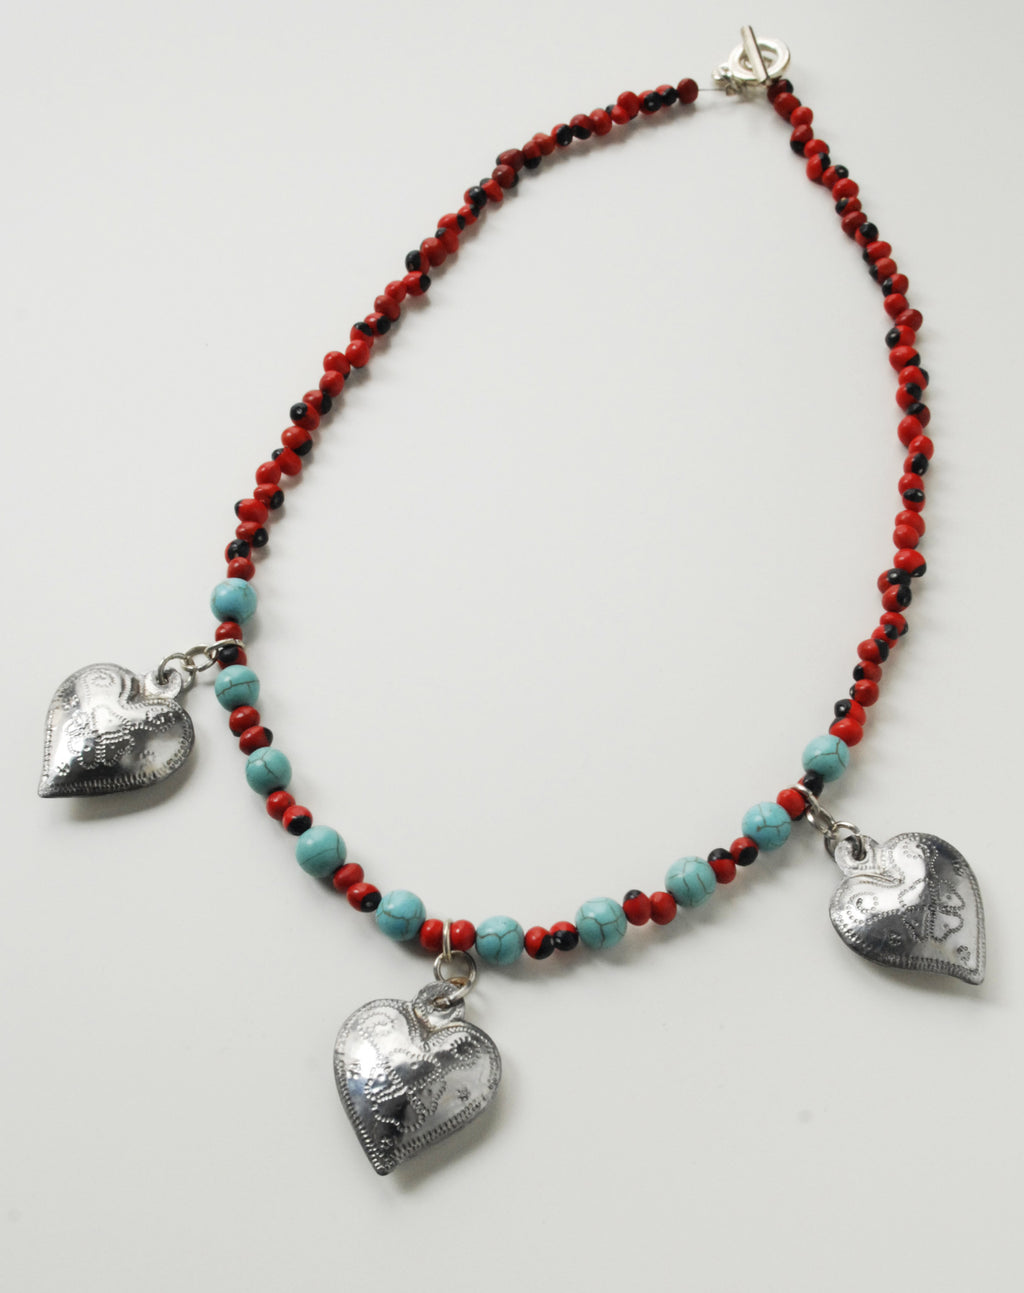 Handmade tin heart necklace with turquoise